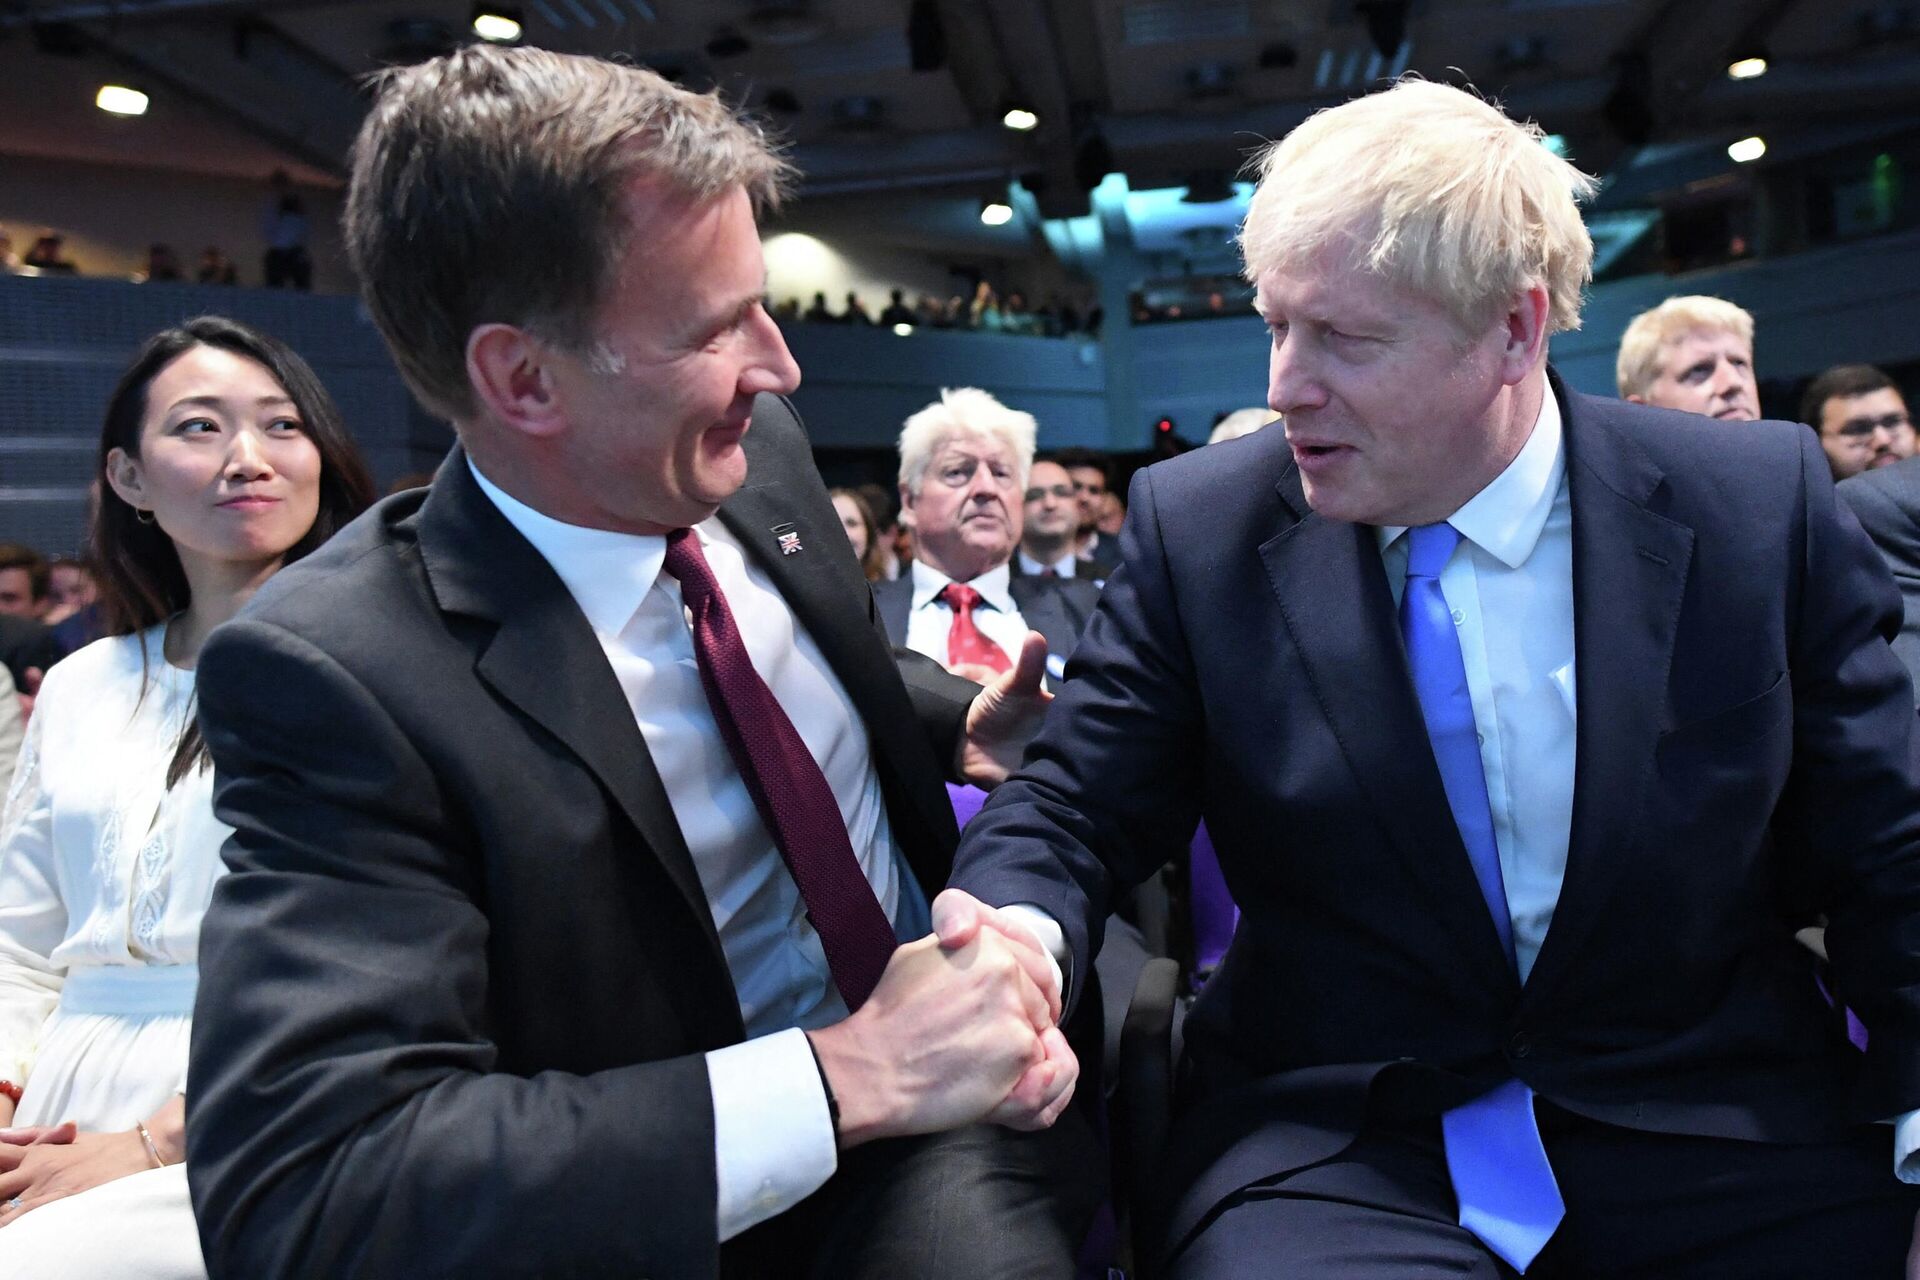 Leadership contender Jeremy Hunt (L) shakes hands to congratulate new Conservative Party leader and incoming prime minister Boris Johnson (R) as the results of the leadership contest are announced at an event in central London on July 23, 2019 - Sputnik International, 1920, 06.07.2022